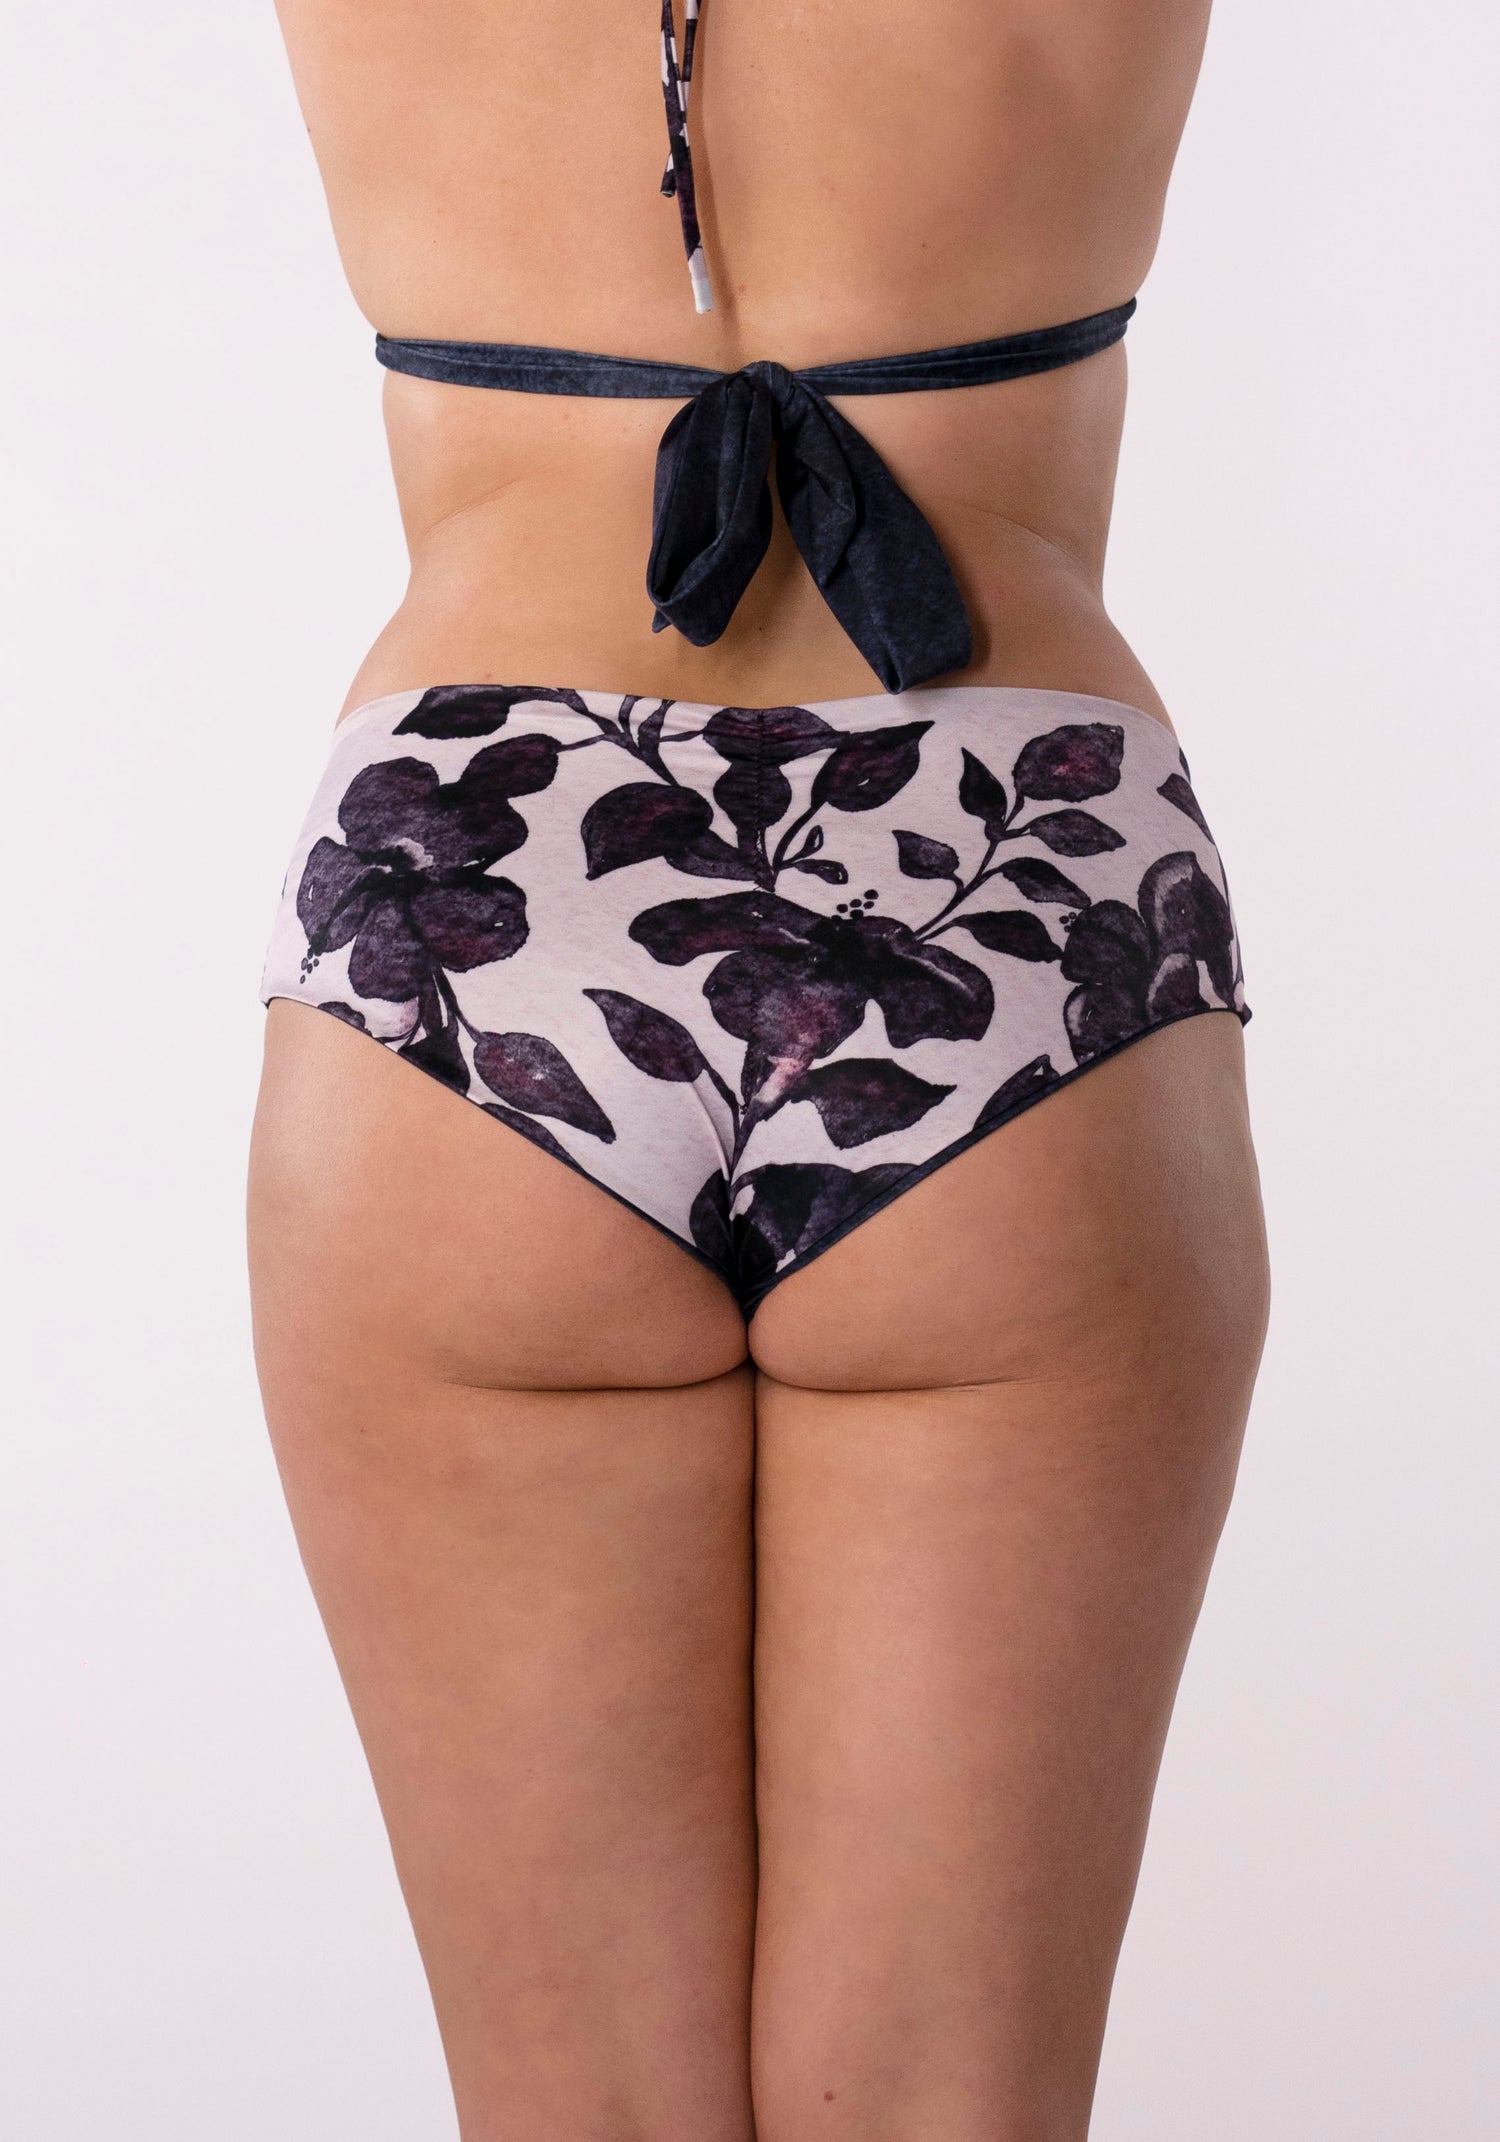 Low rise bikini bottoms with a boyish leg line to look cute and flirty! These reversible swim bottoms feature a navy blue watercolour solid wash on one side and a feminine pale pink with navy blue floral hibiscus watercolour print on the other side. Ruched detailing on the center of the bum help to accentuate your sexy curves!